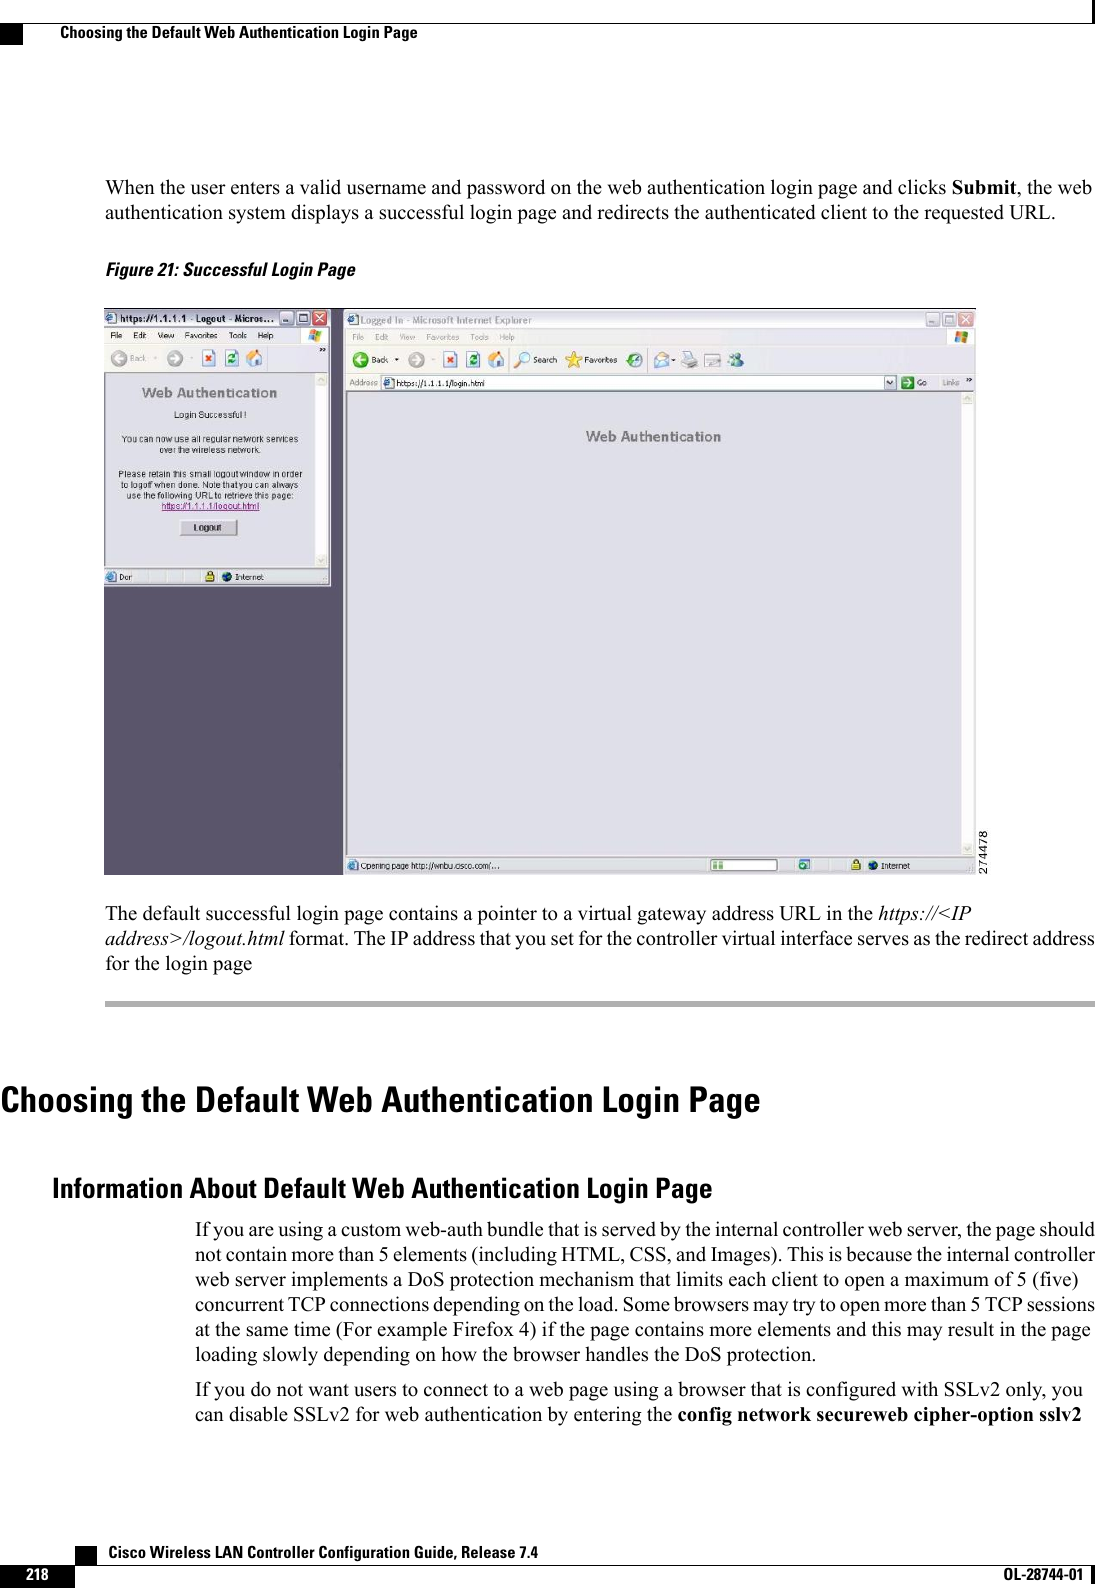 When the user enters a valid username and password on the web authentication login page and clicks Submit, the webauthentication system displays a successful login page and redirects the authenticated client to the requested URL.Figure 21: Successful Login PageThe default successful login page contains a pointer to a virtual gateway address URL in the https://&lt;IPaddress&gt;/logout.html format. The IP address that you set for the controller virtual interface serves as the redirect addressfor the login pageChoosing the Default Web Authentication Login PageInformation About Default Web Authentication Login PageIf you are using a custom web-auth bundle that is served by the internal controller web server, the page shouldnot contain more than 5 elements (including HTML, CSS, and Images). This is because the internal controllerweb server implements a DoS protection mechanism that limits each client to open a maximum of 5 (five)concurrent TCP connections depending on the load. Some browsers may try to open more than 5 TCP sessionsat the same time (For example Firefox 4) if the page contains more elements and this may result in the pageloading slowly depending on how the browser handles the DoS protection.If you do not want users to connect to a web page using a browser that is configured with SSLv2 only, youcan disable SSLv2 for web authentication by entering the config network secureweb cipher-option sslv2   Cisco Wireless LAN Controller Configuration Guide, Release 7.4218 OL-28744-01  Choosing the Default Web Authentication Login Page